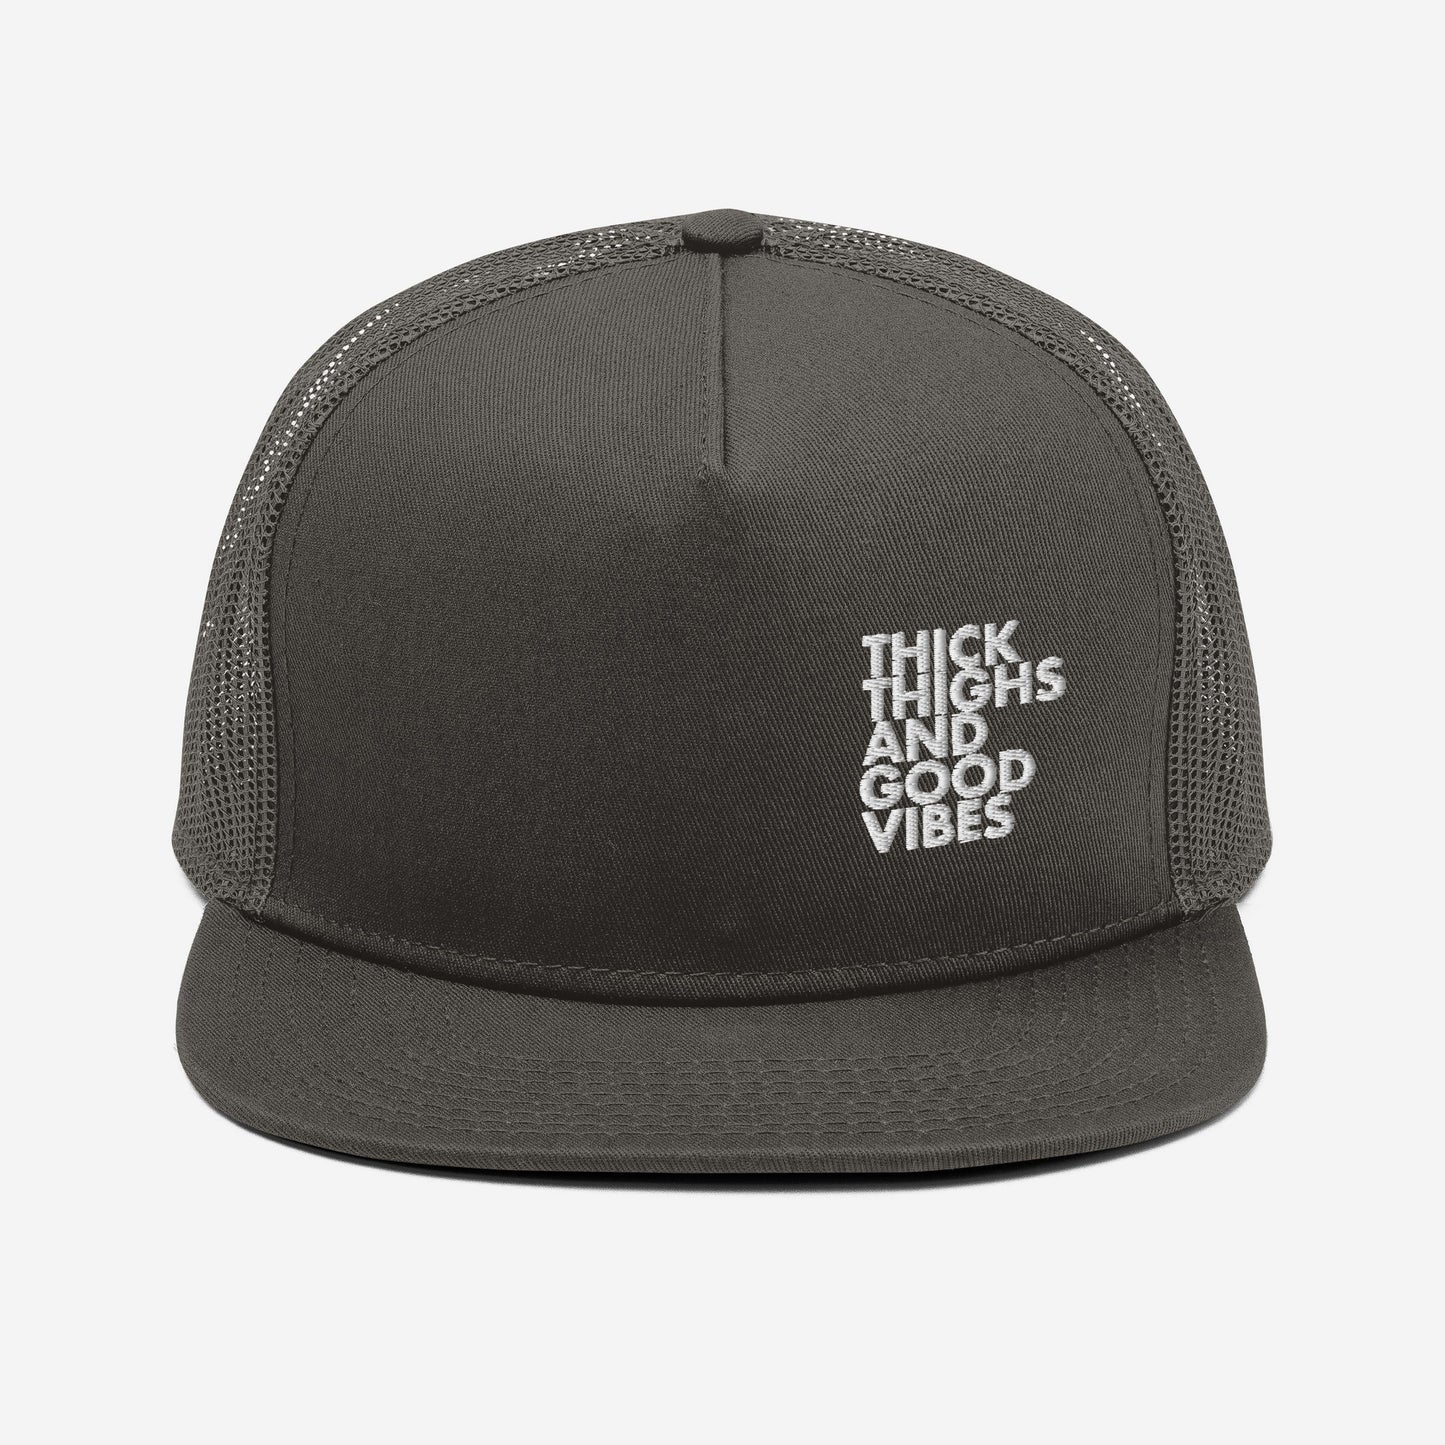 The THICK Thighs and Good Vibes Mesh Back Snapback